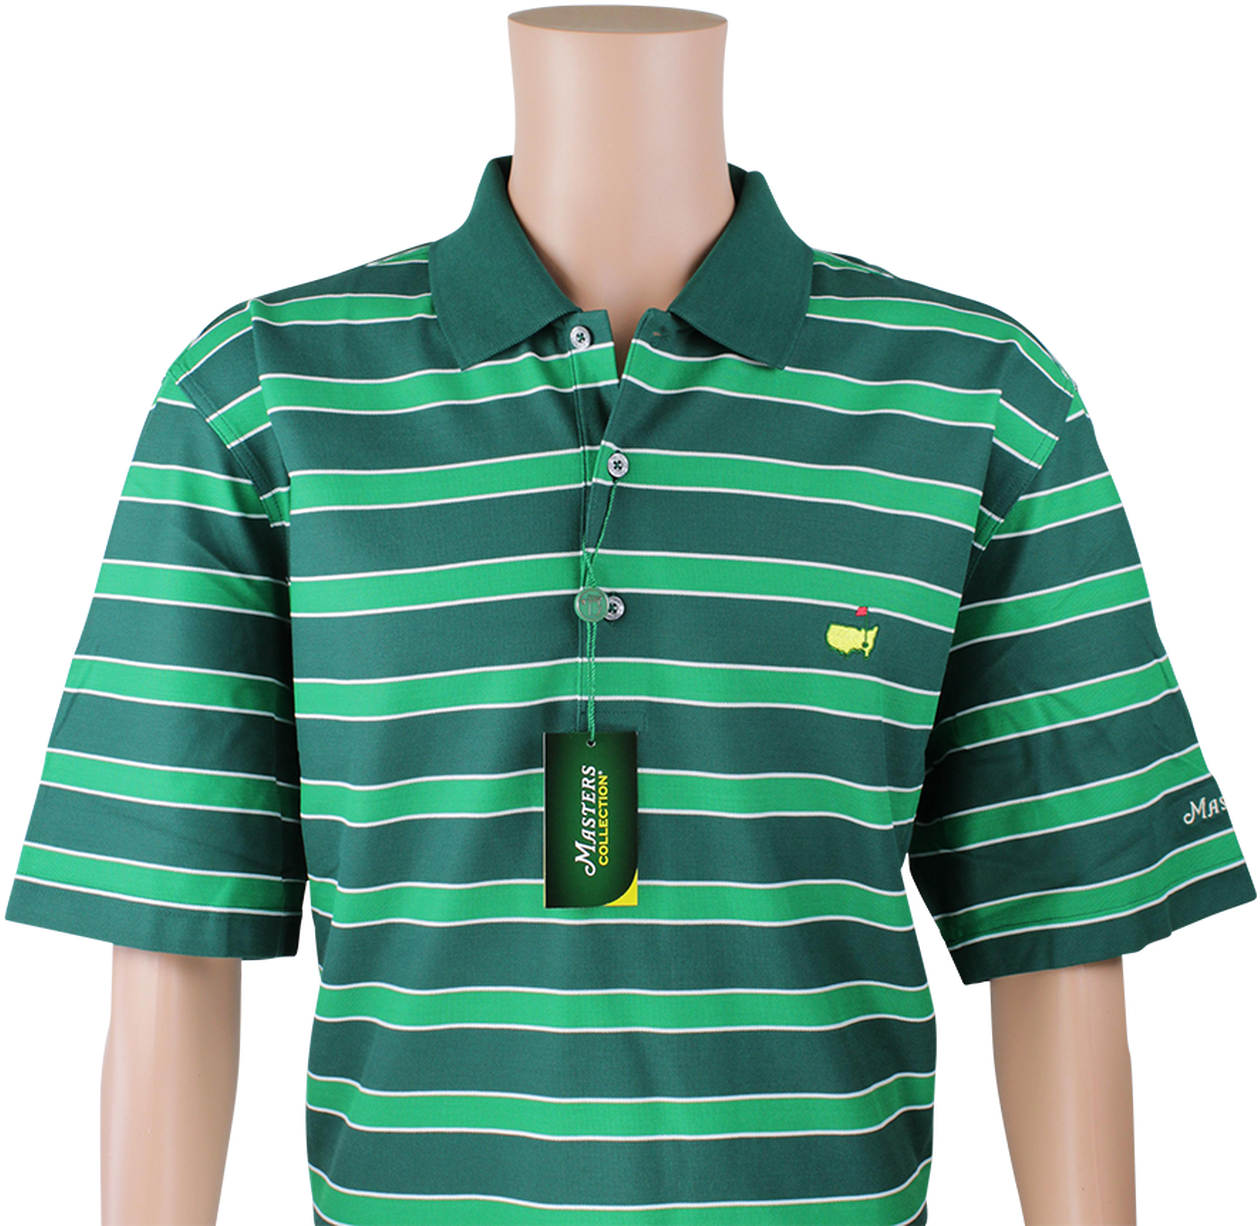 Green Striped Polo Shirt Mannequin PNG image